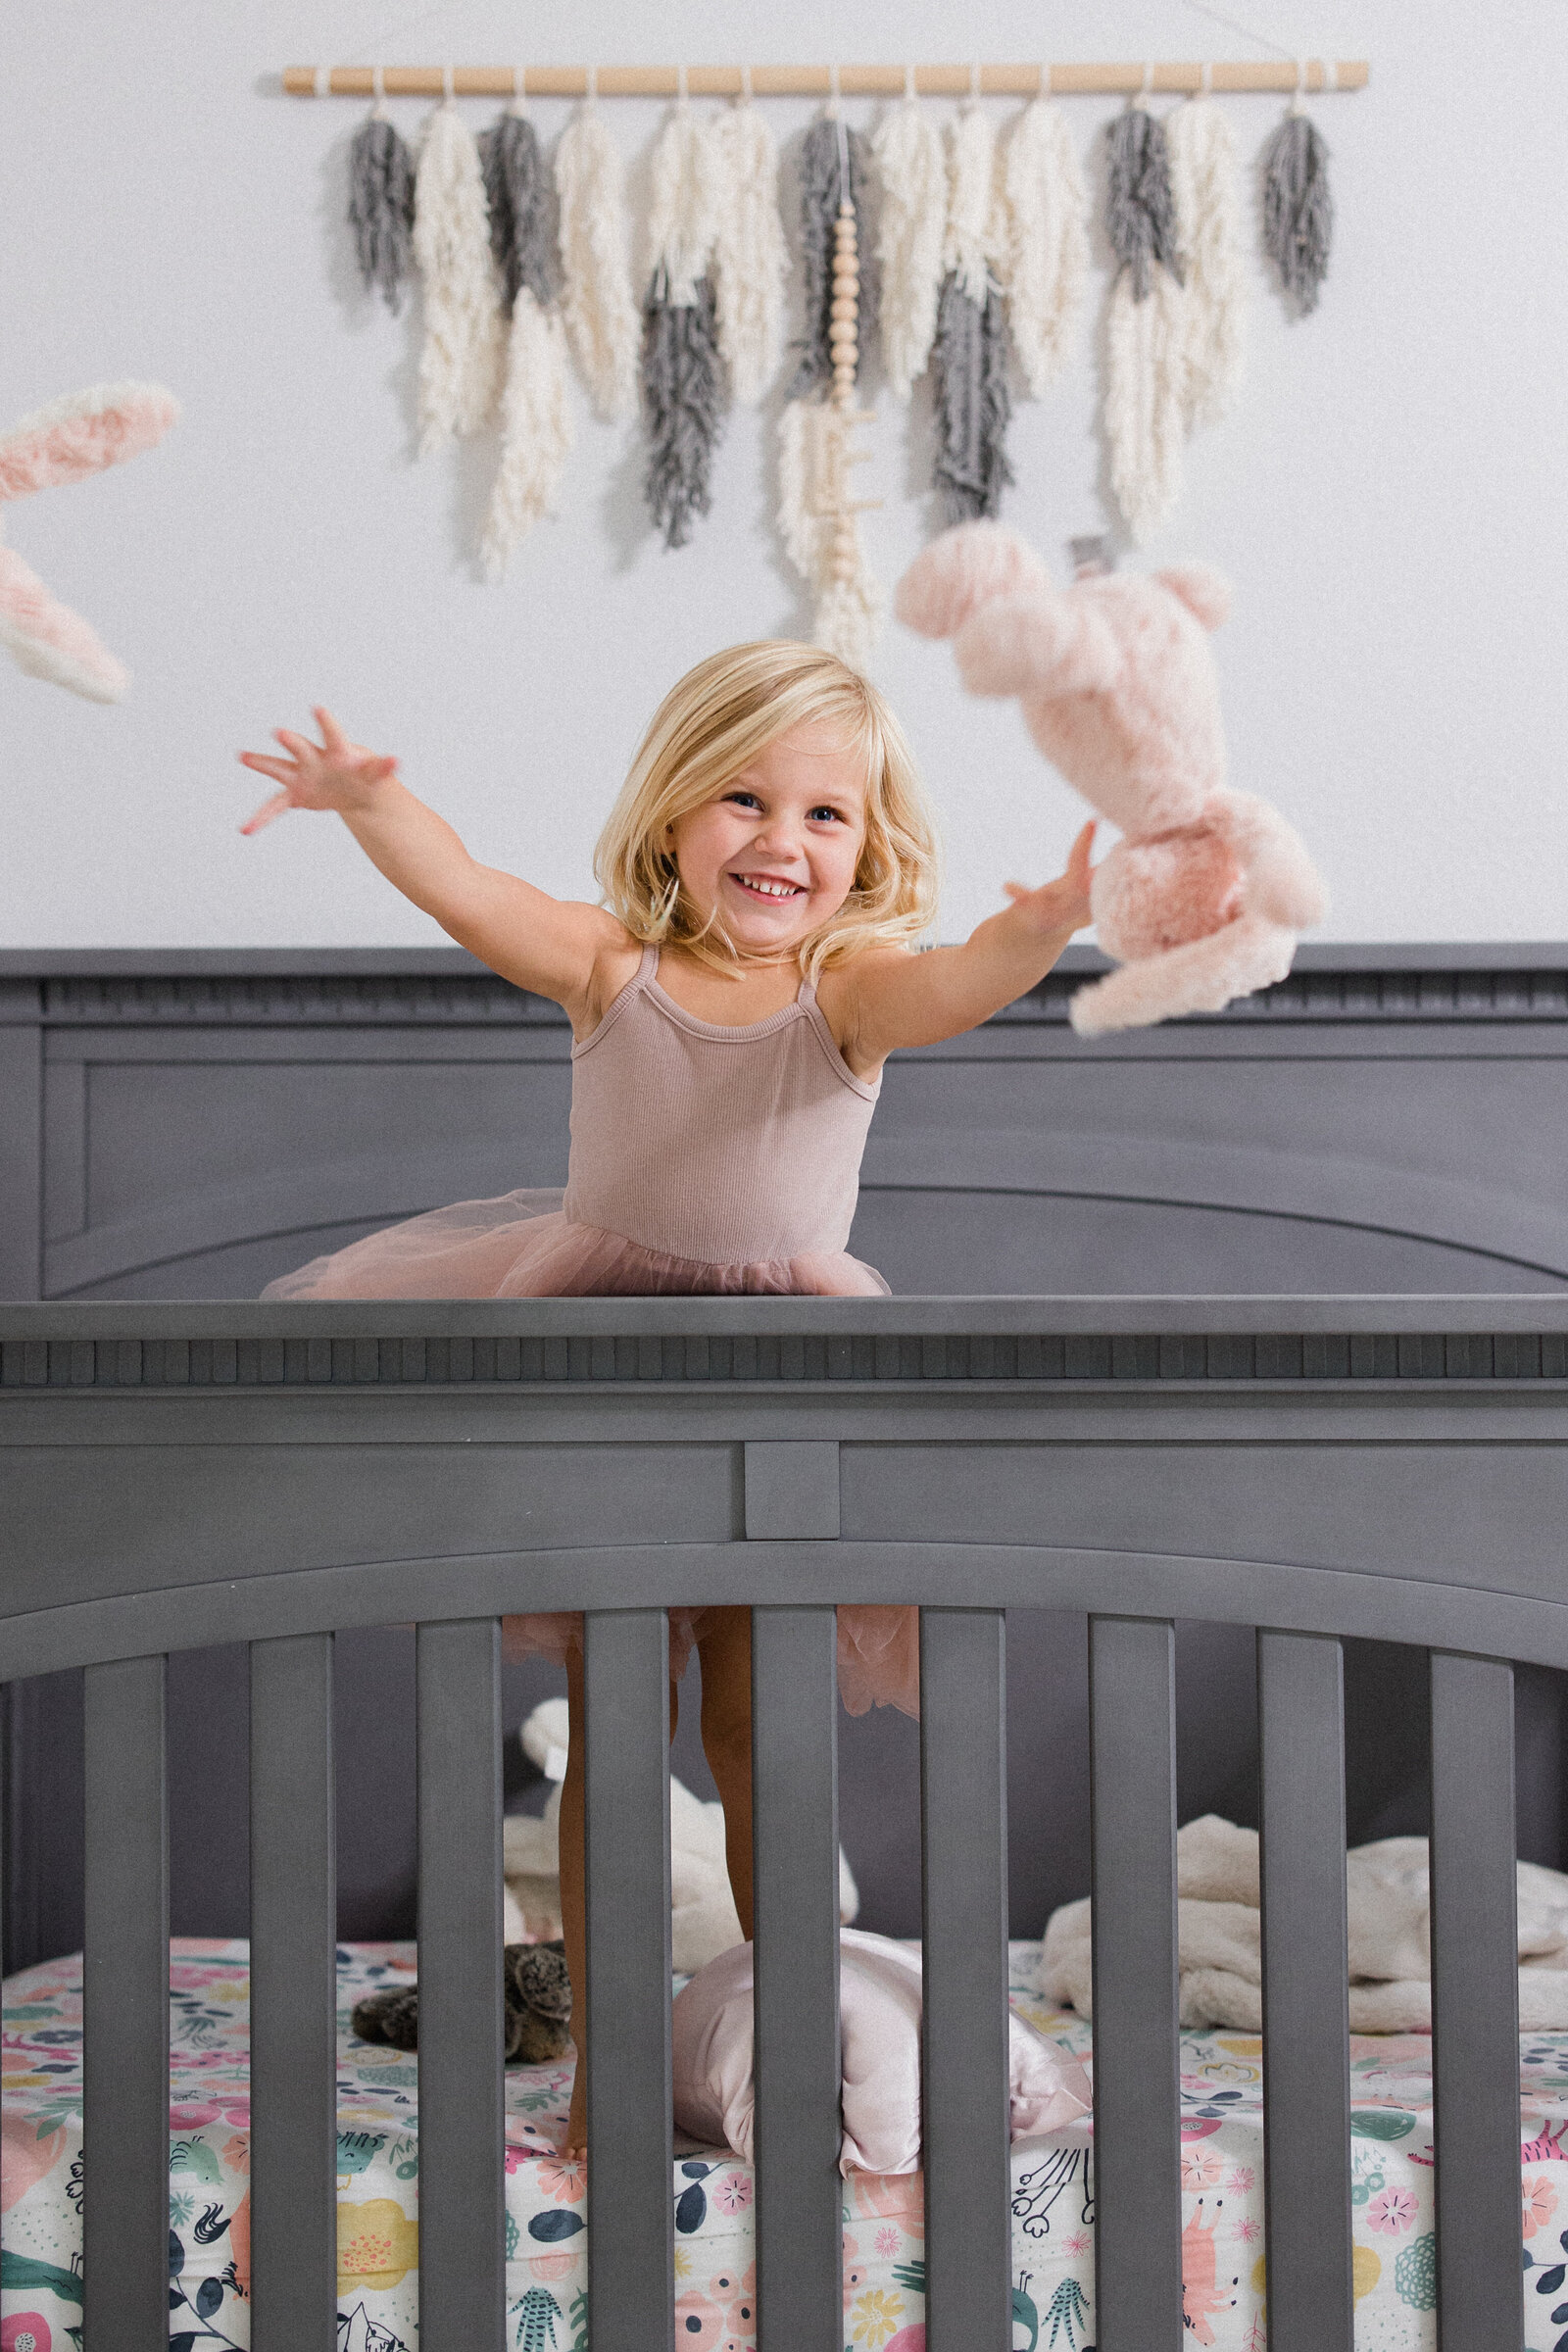 A little girl throws her stuffed animals out of her crib while laughing